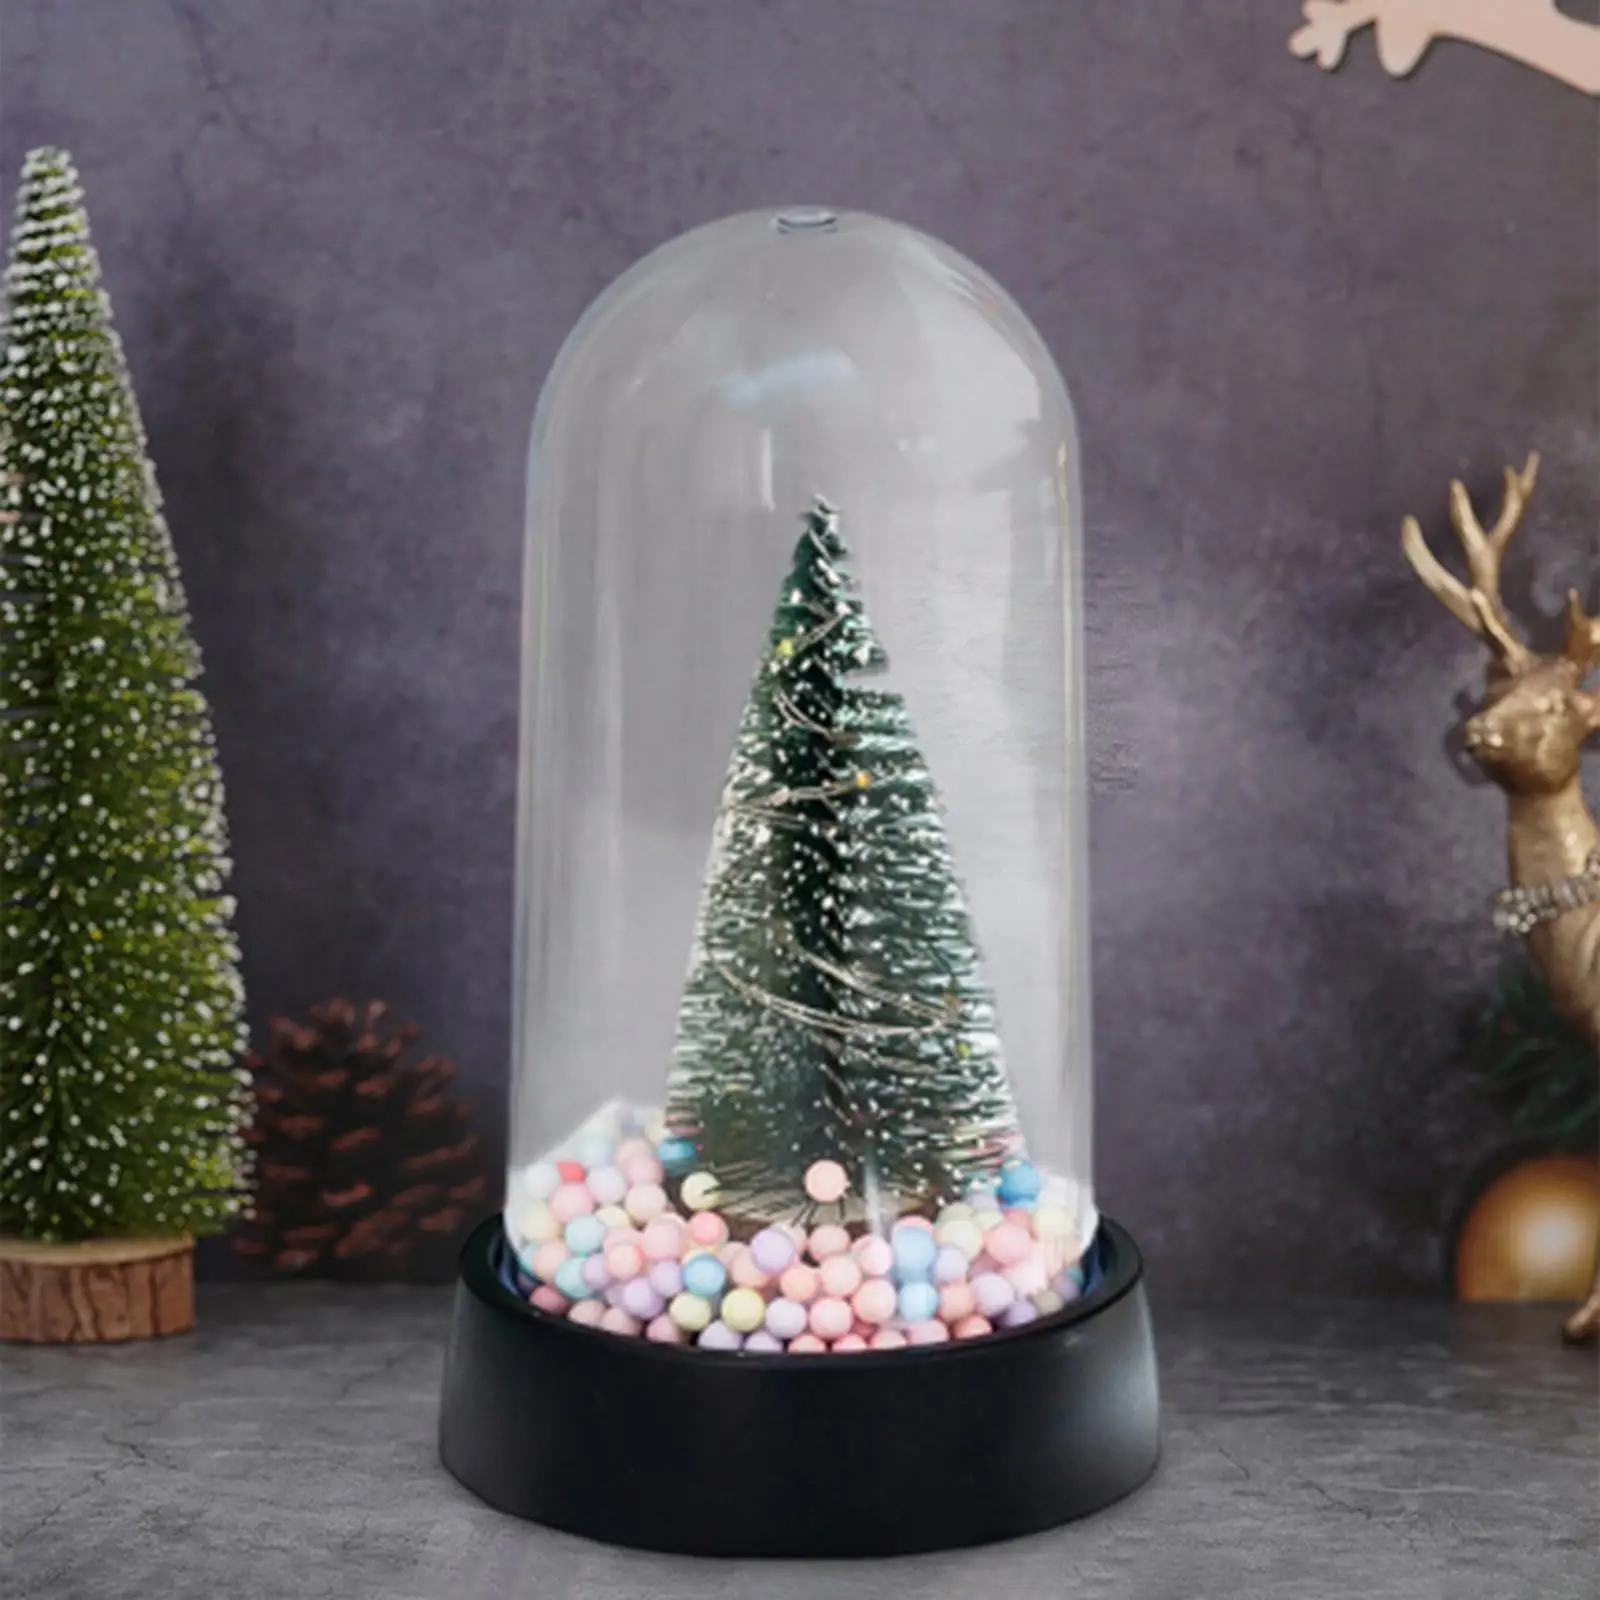 Mini Christmas Tree with LED Simulation Realistic Christmas Ornament Xmas Decoration for Holiday Shelf Desktop Fireplace Gifts